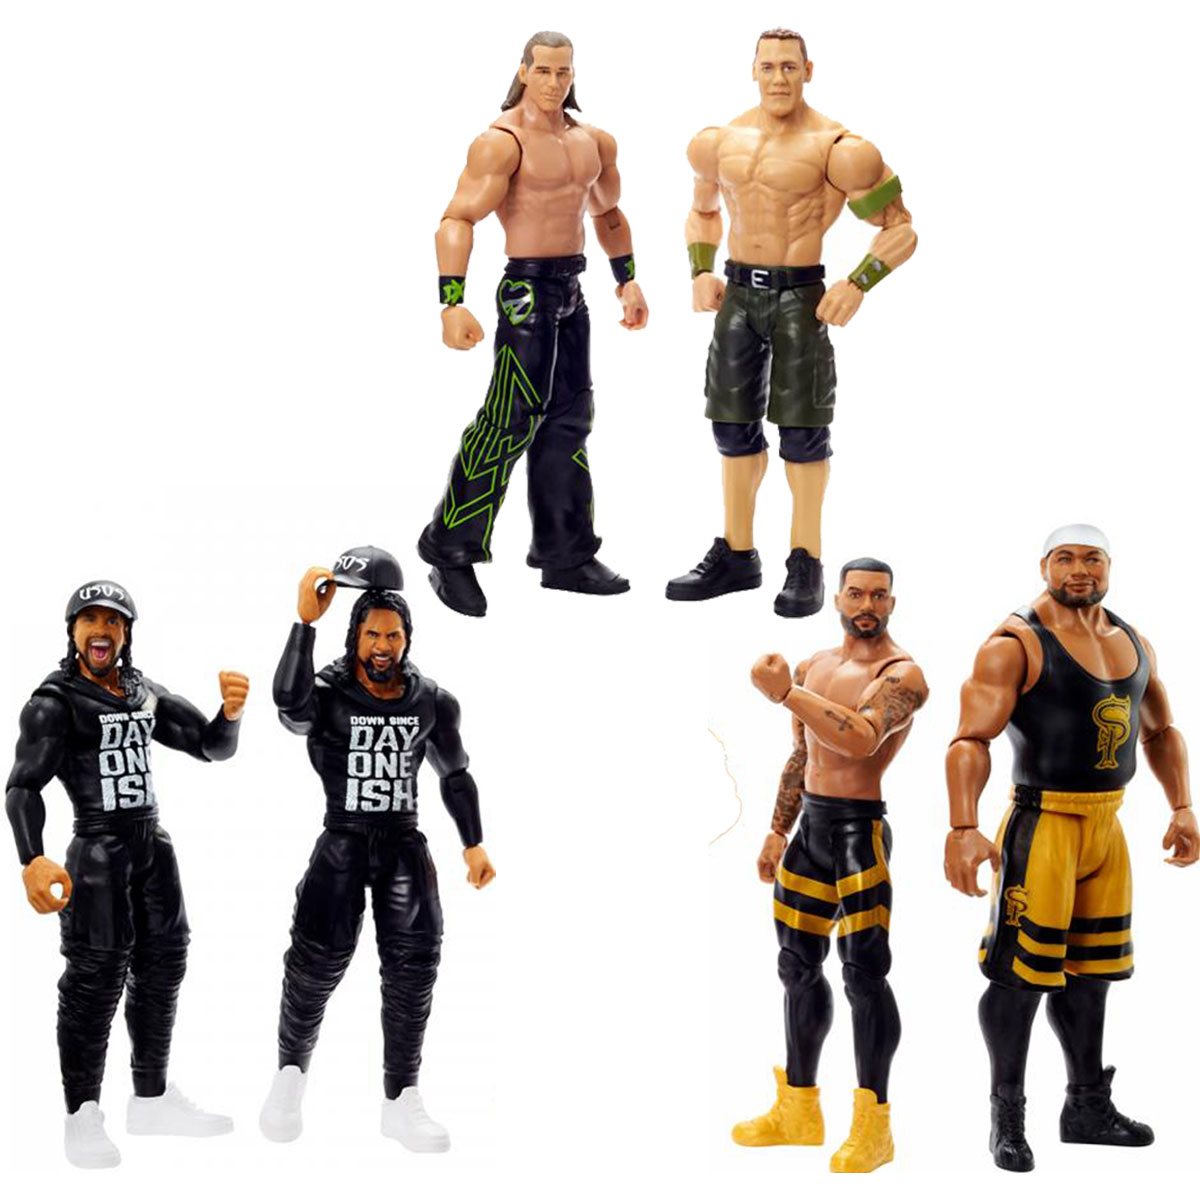 Wwe Championship Showdown Series 6 Action Figure 2 Pack Case Of 4